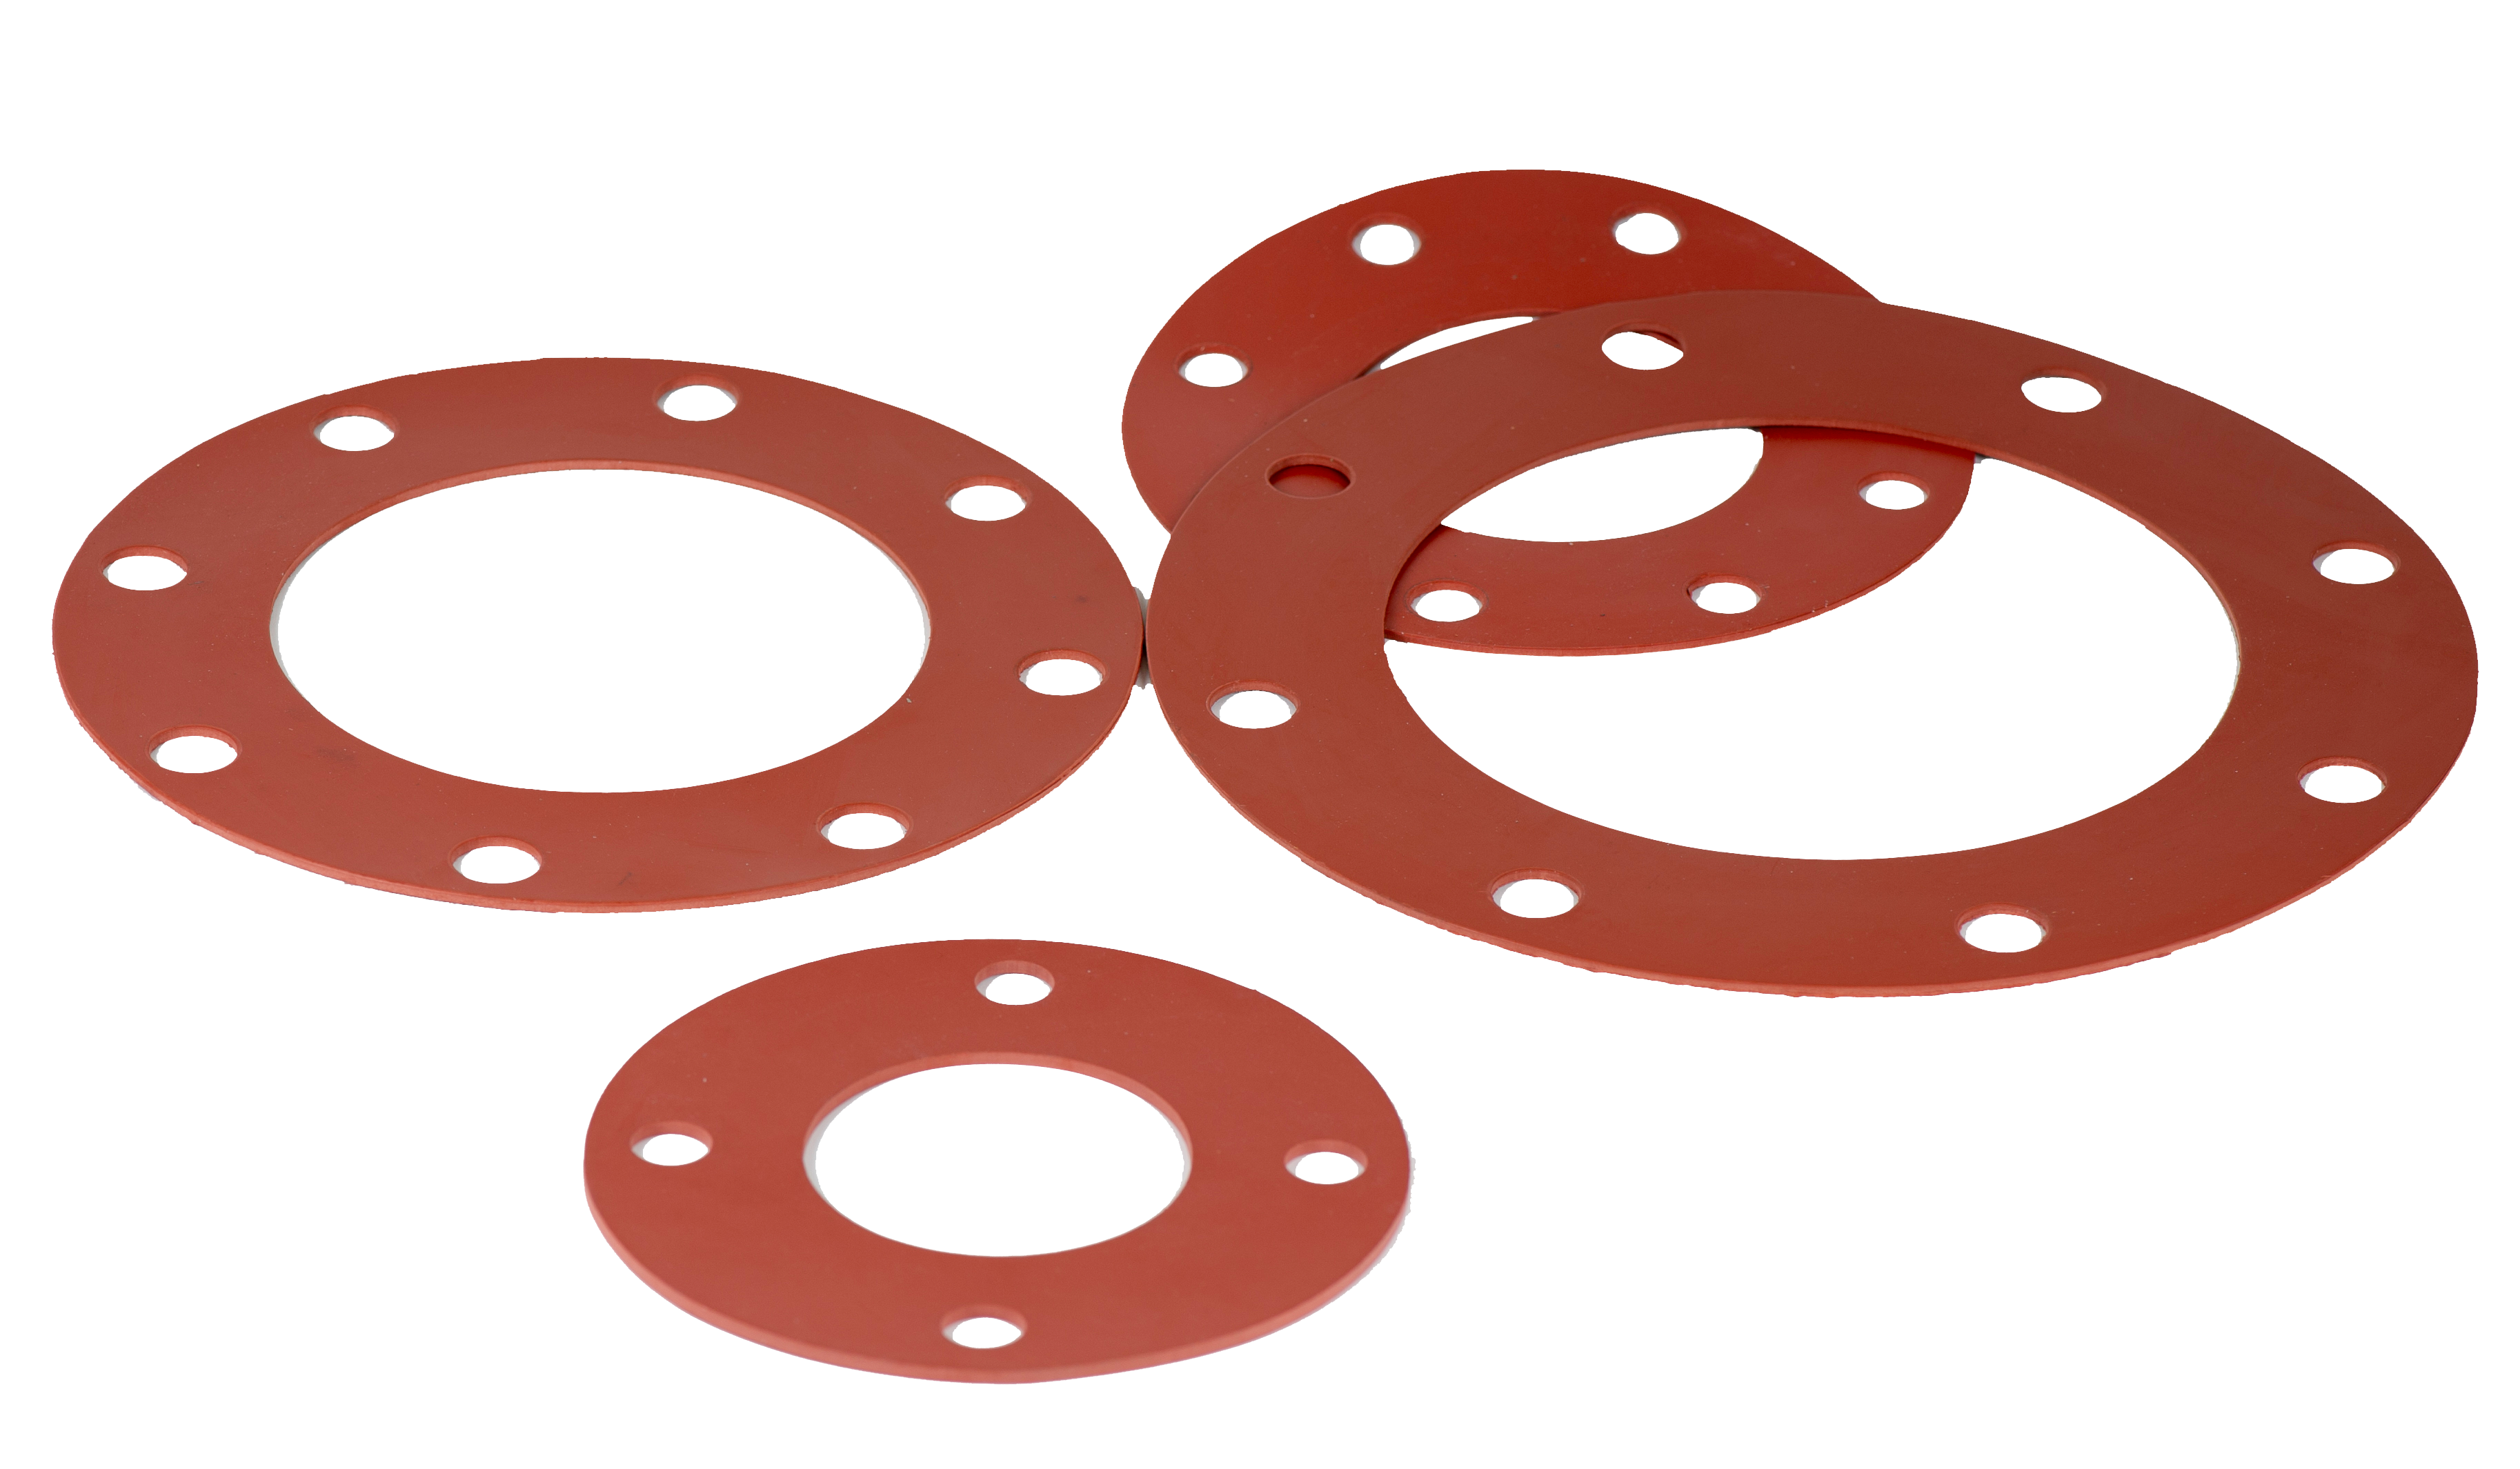 Class 150 Full Face Flexible Graphite Flange Gasket for 2-1/2 Pipe-1/16 Thick 